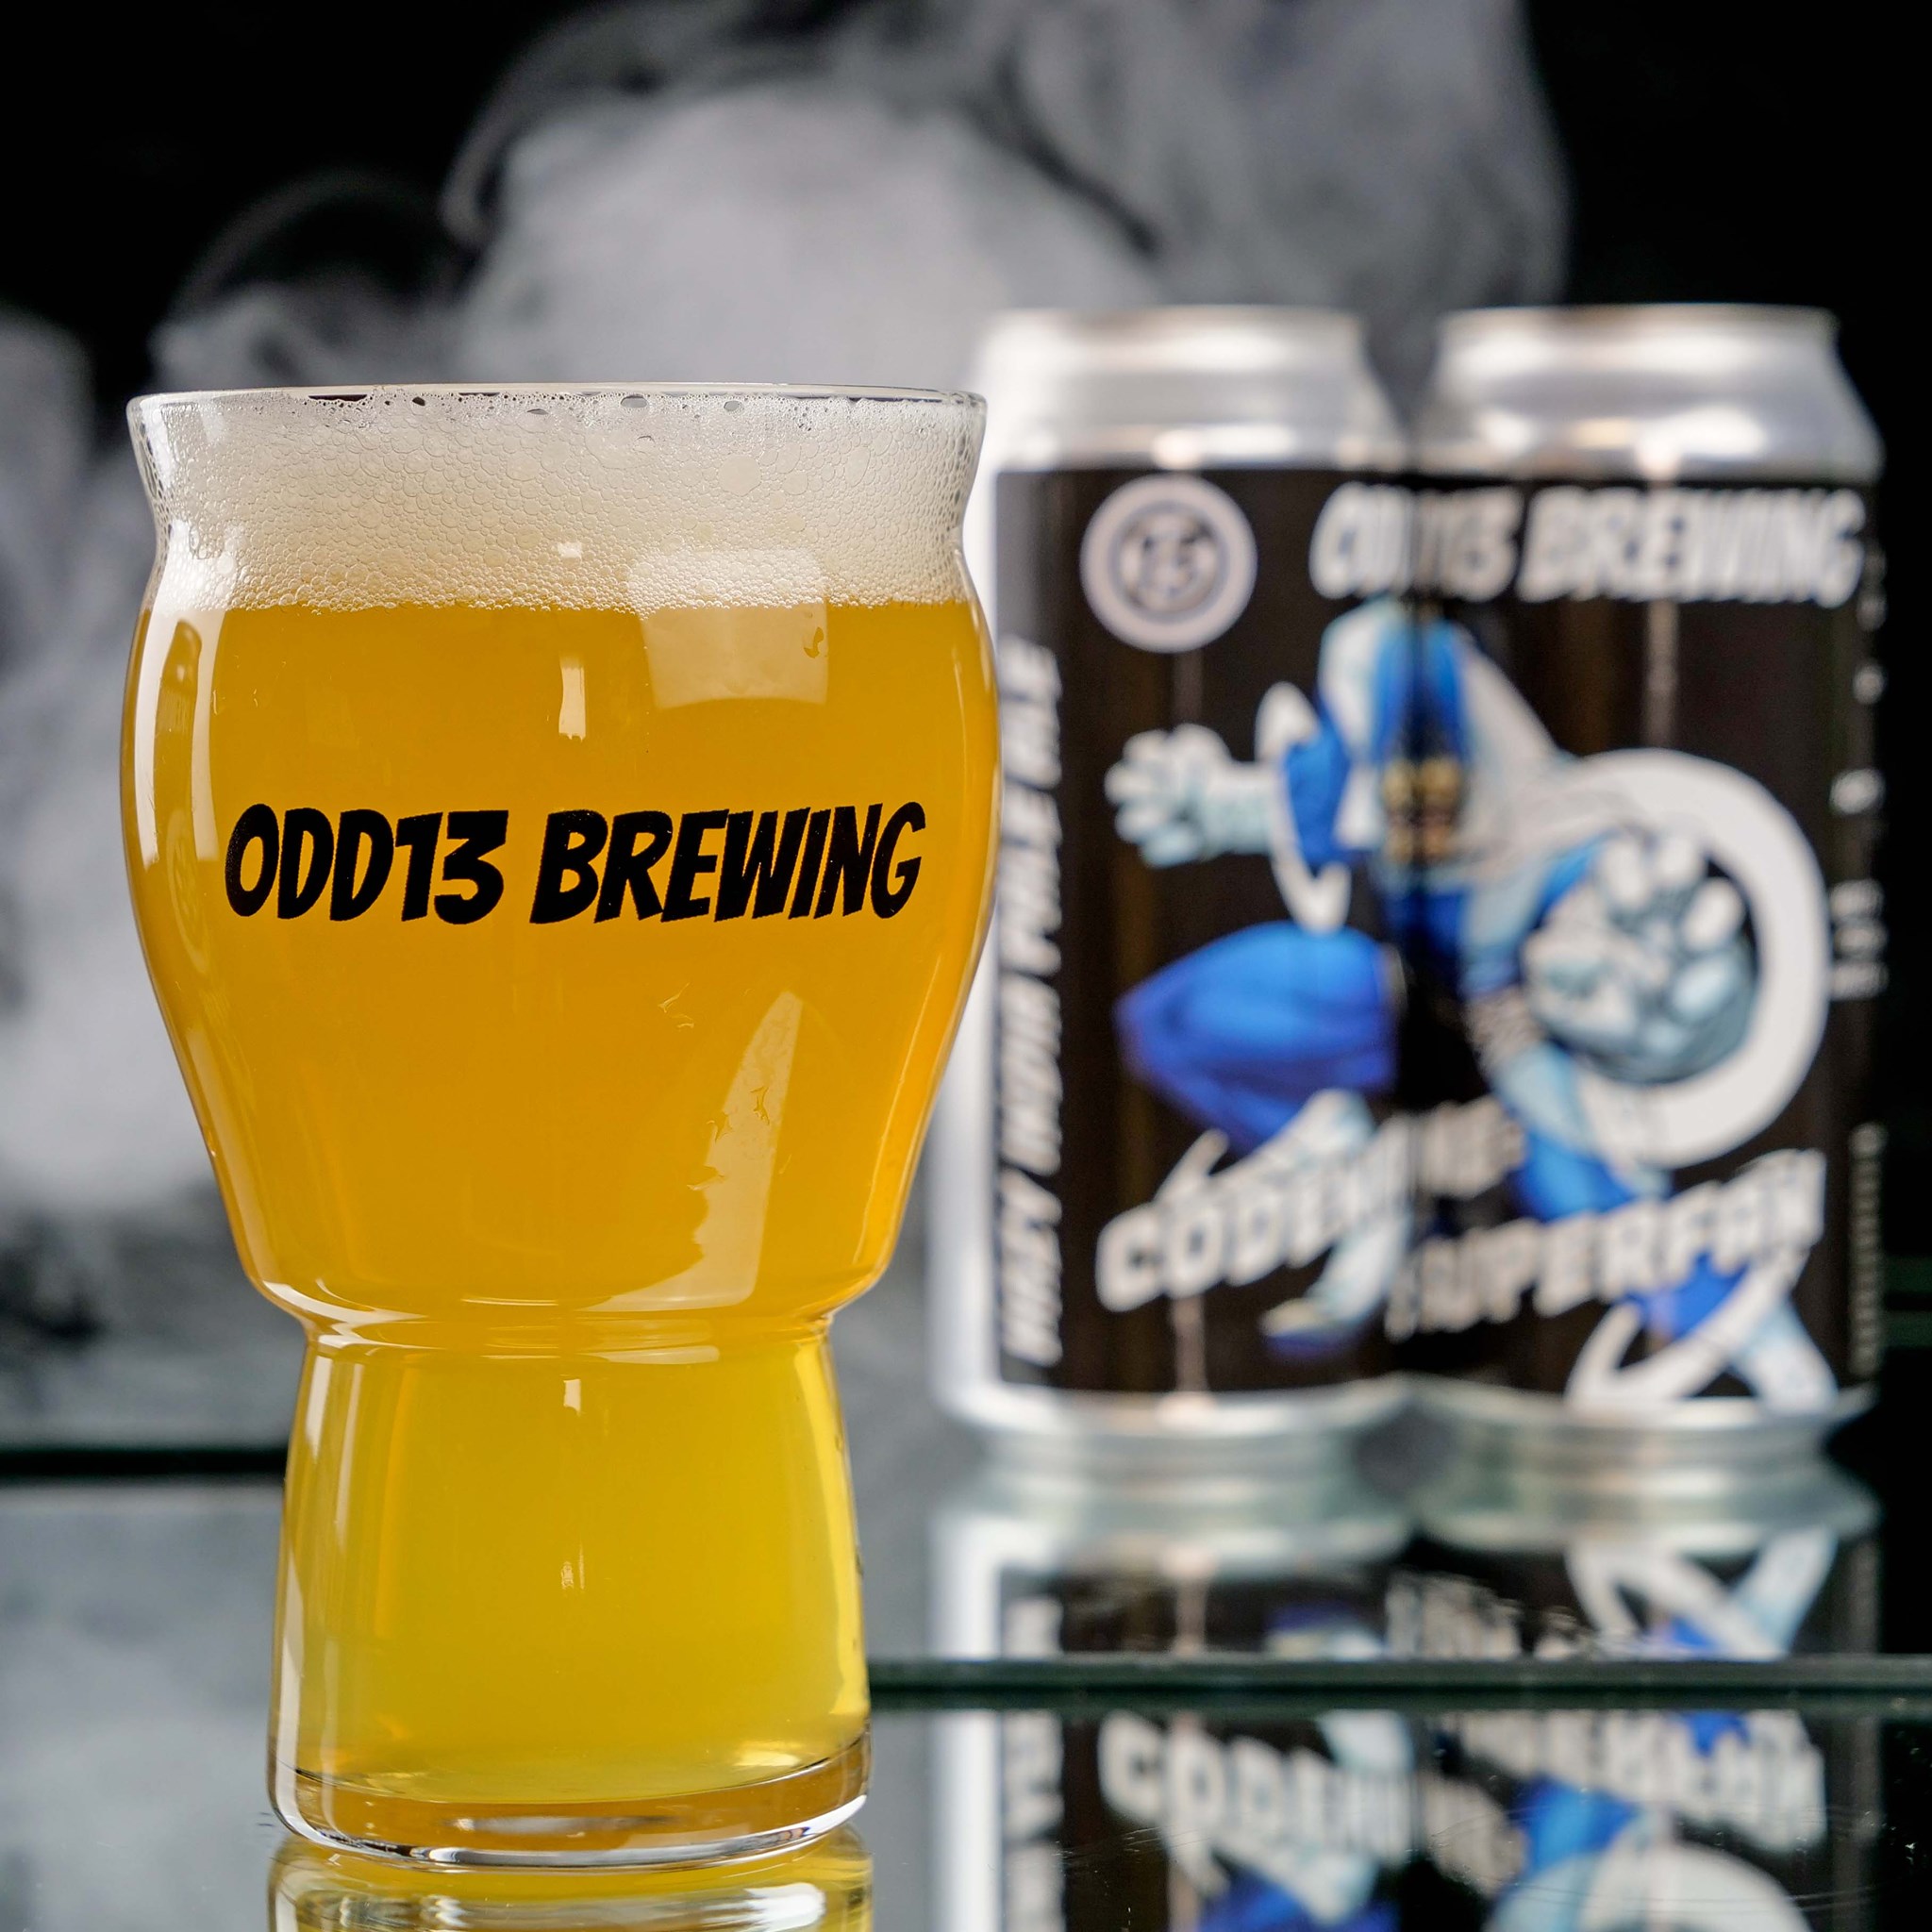 4 Noses Brewing’s Parent Company Acquires Odd13 Brewing